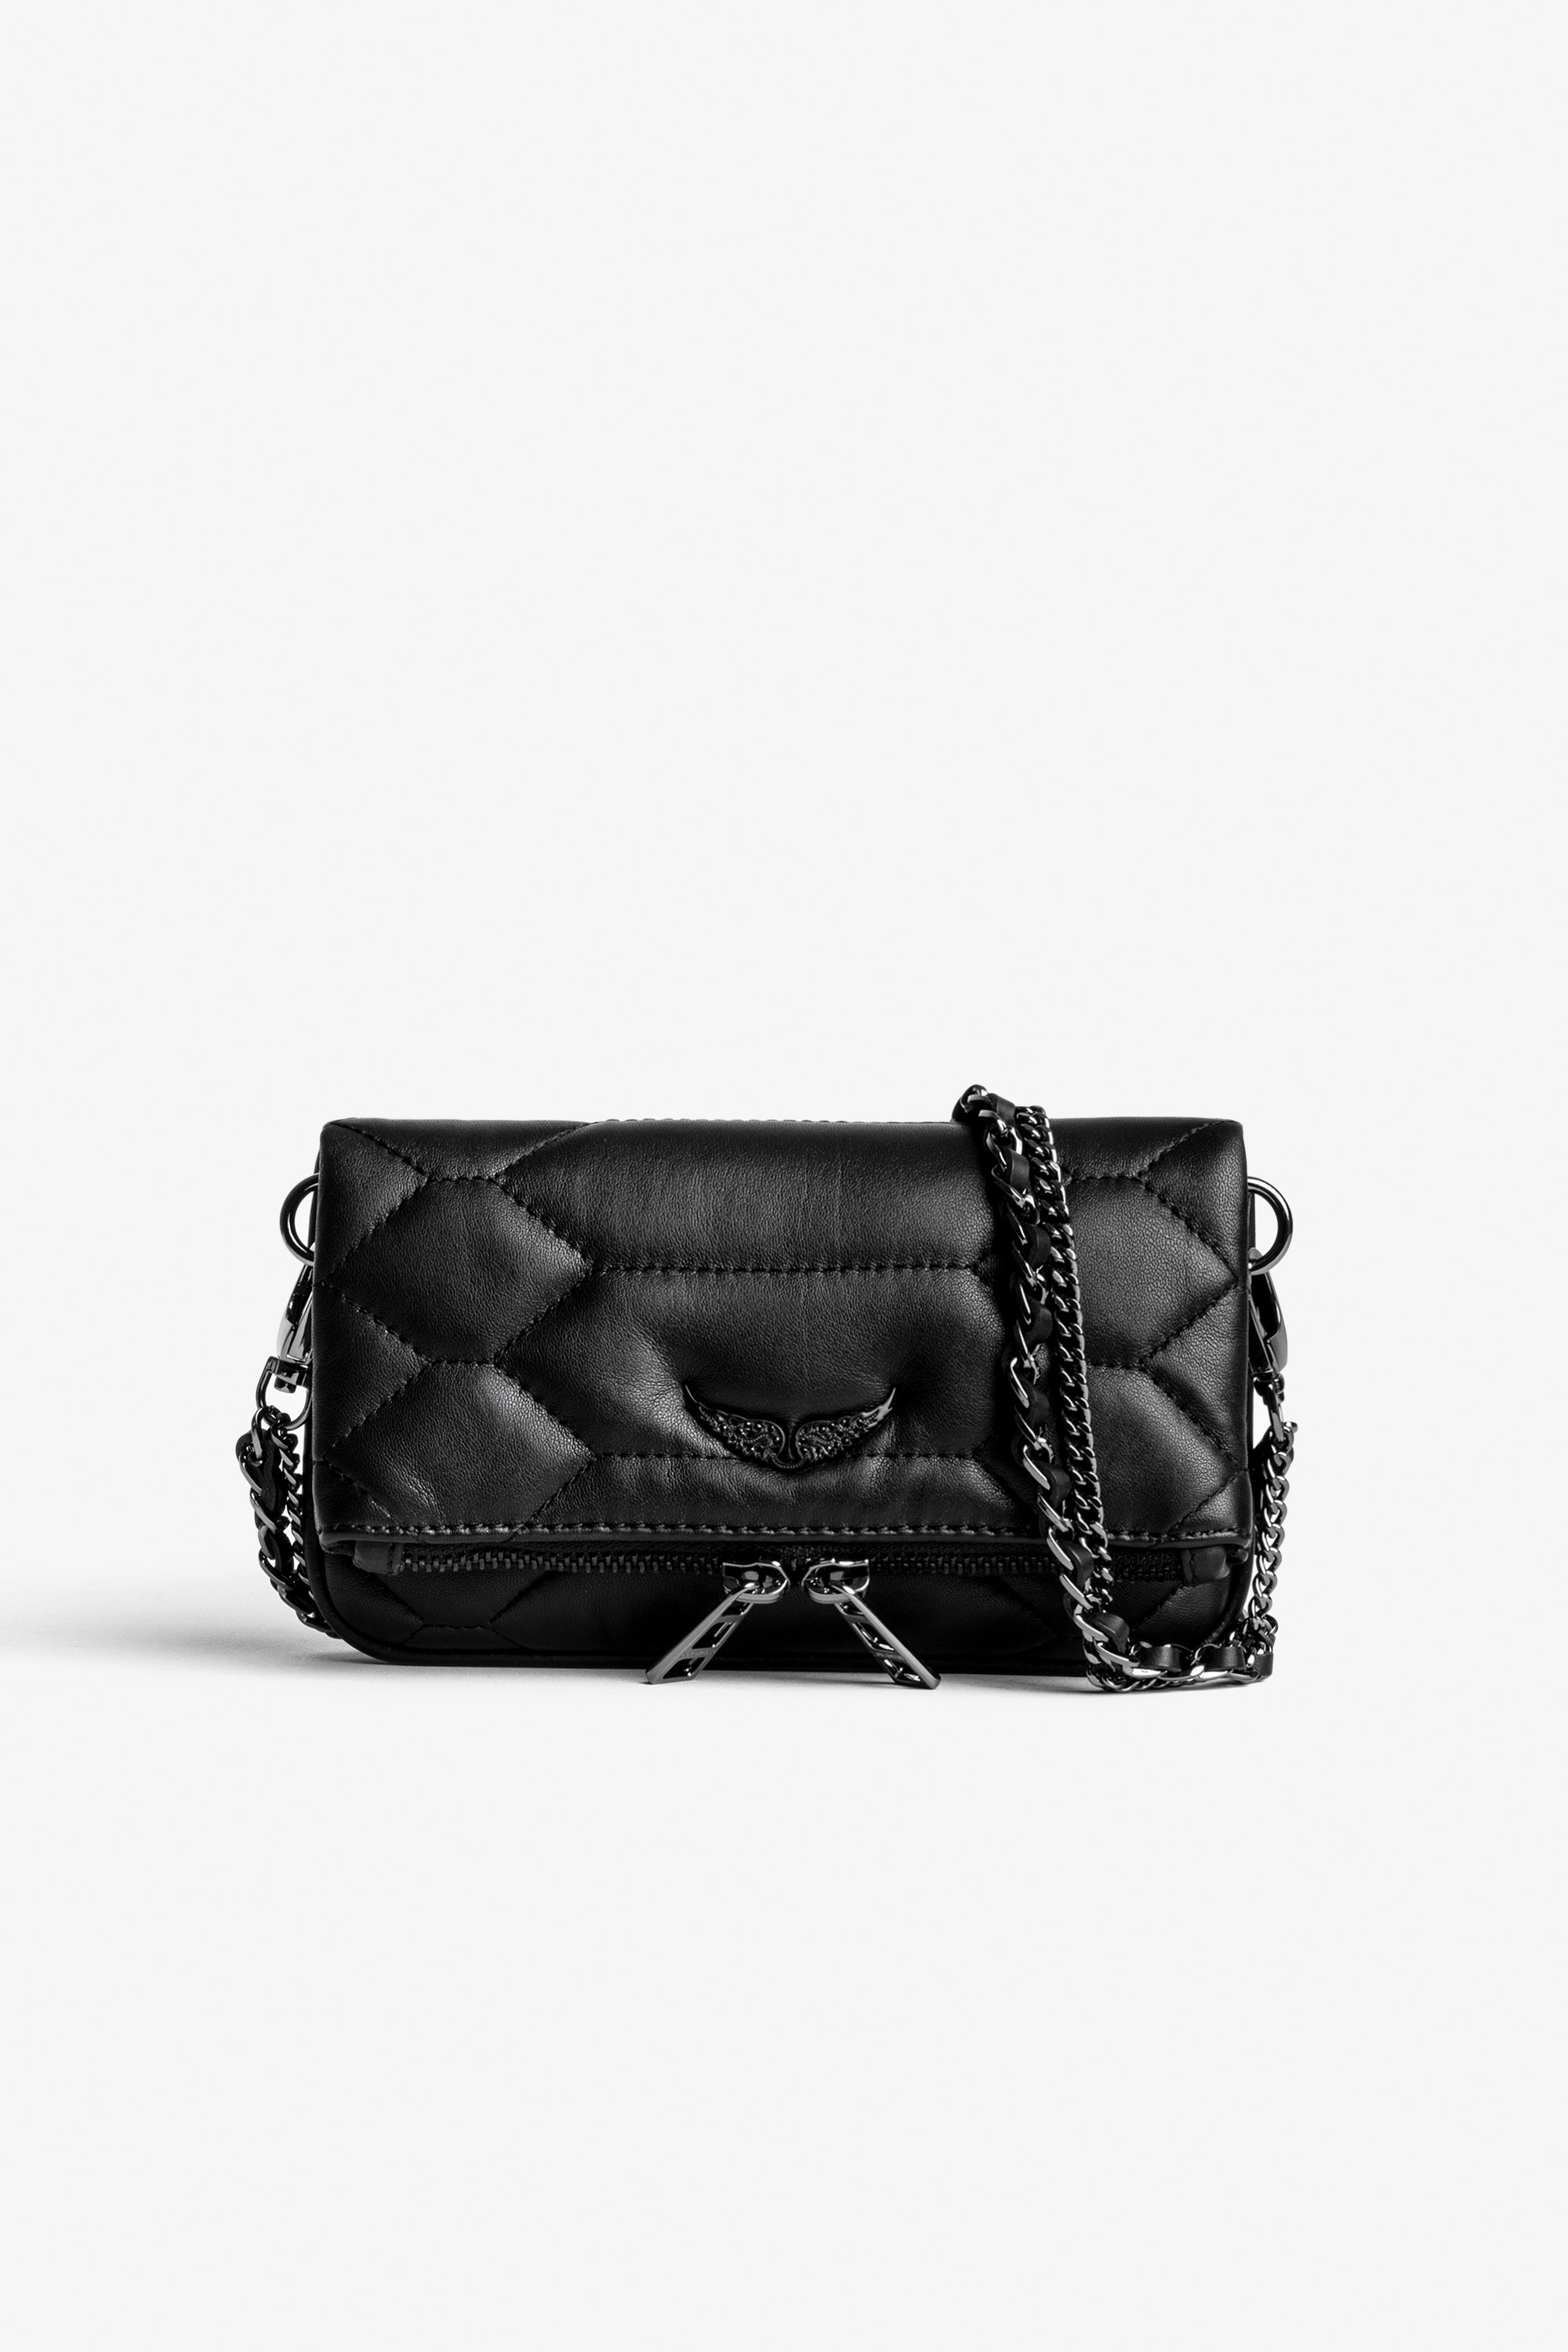 Rock Nano Quilted レザー クラッチバッグ Rock Nano Black Quilted Leather Clutch